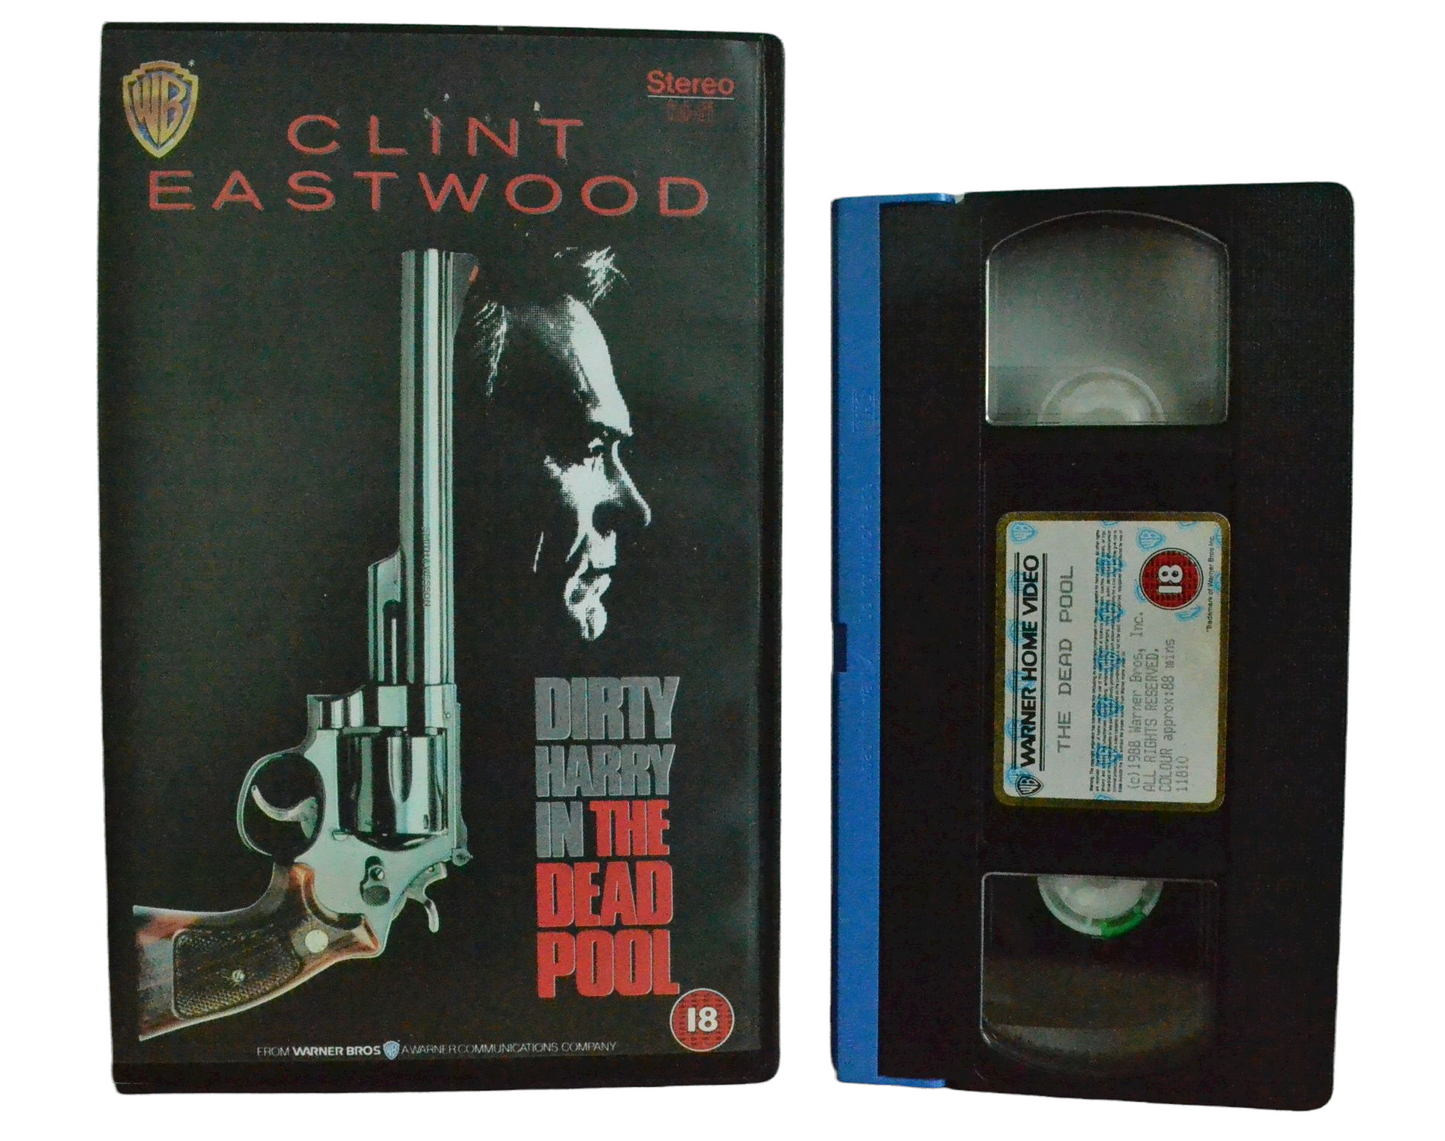 Dirty Harry In the Dead Pool - Clint Eastwood - Warner Home Video - Vintage - Pal VHS-